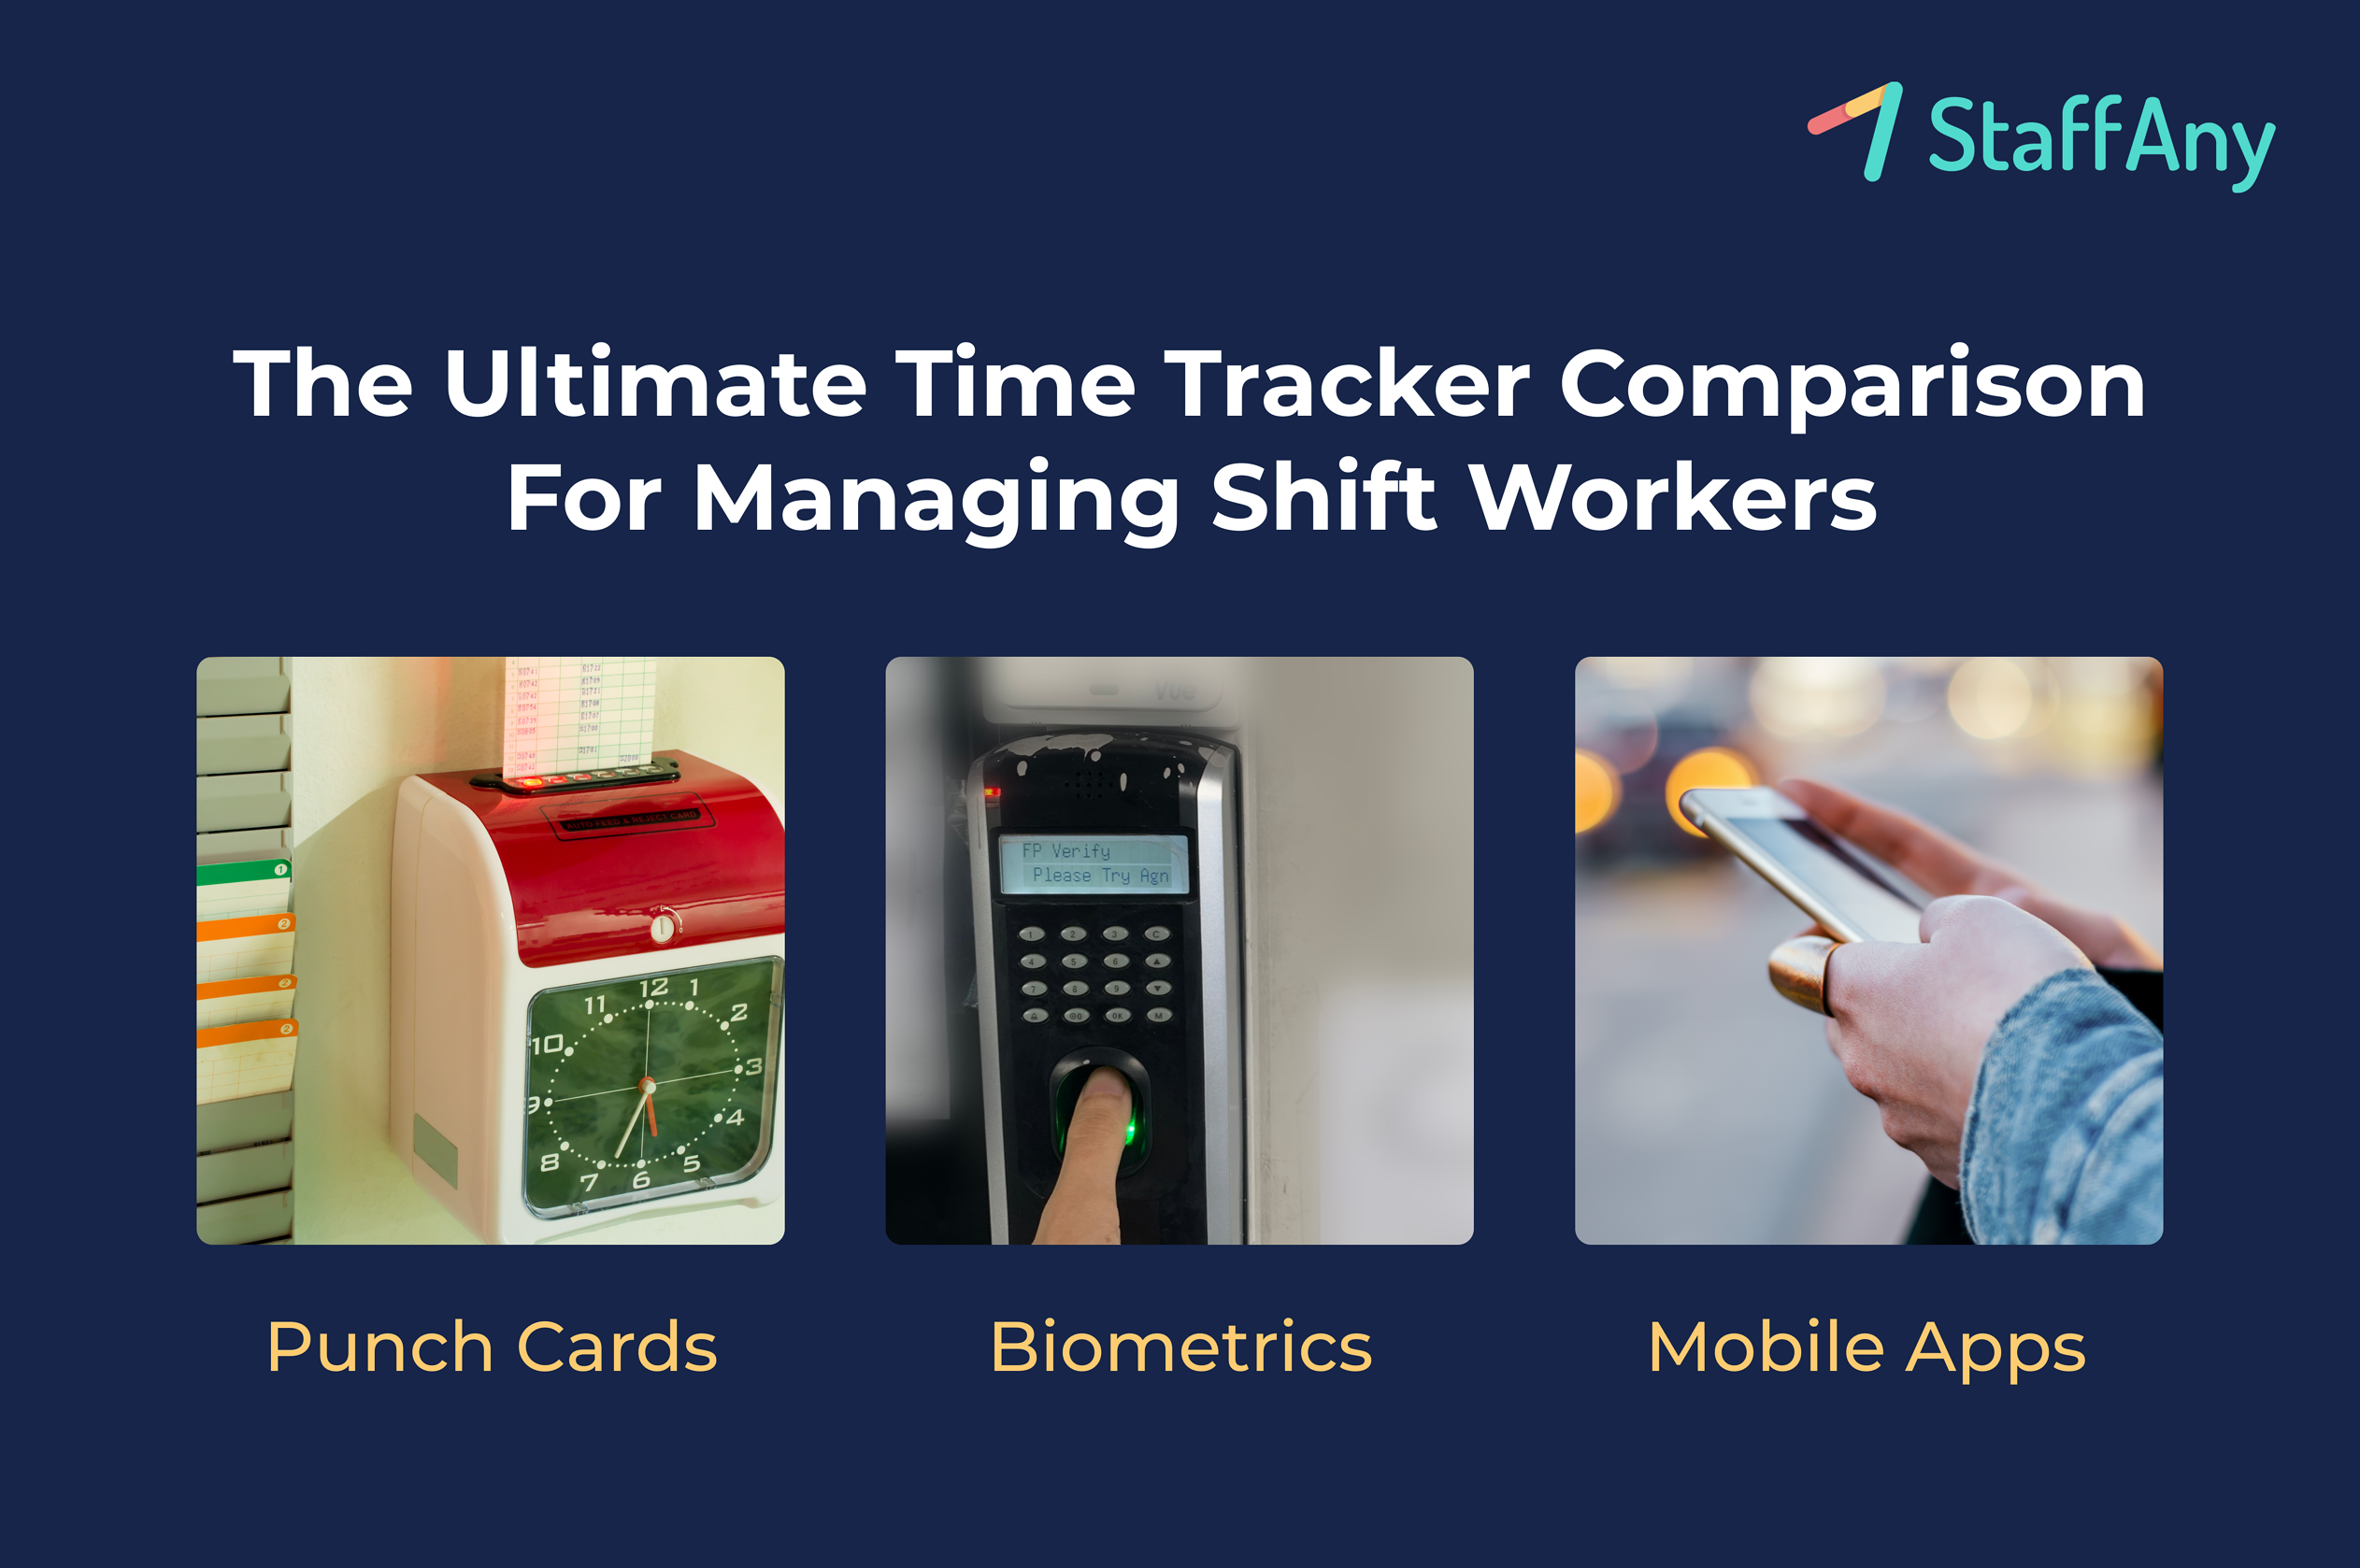 time tracking tools comparison 2021